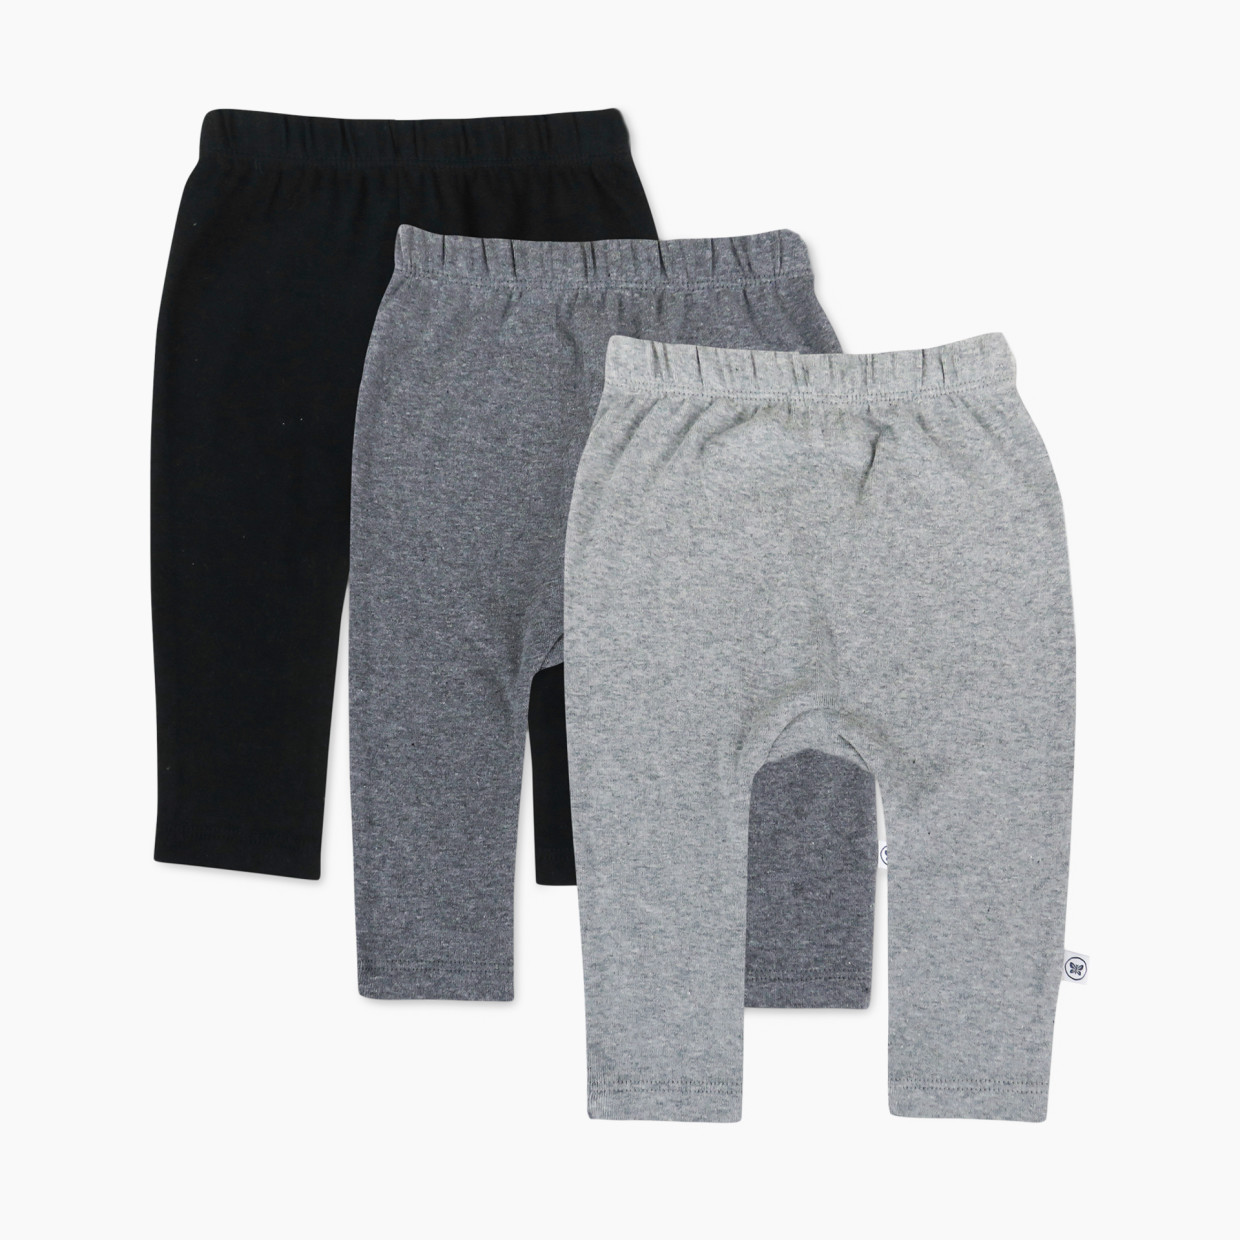 Honest Baby Clothing 3-Pack Organic Cotton Cuff-less Harem Pants - Gray Ombre, 0-3 M.